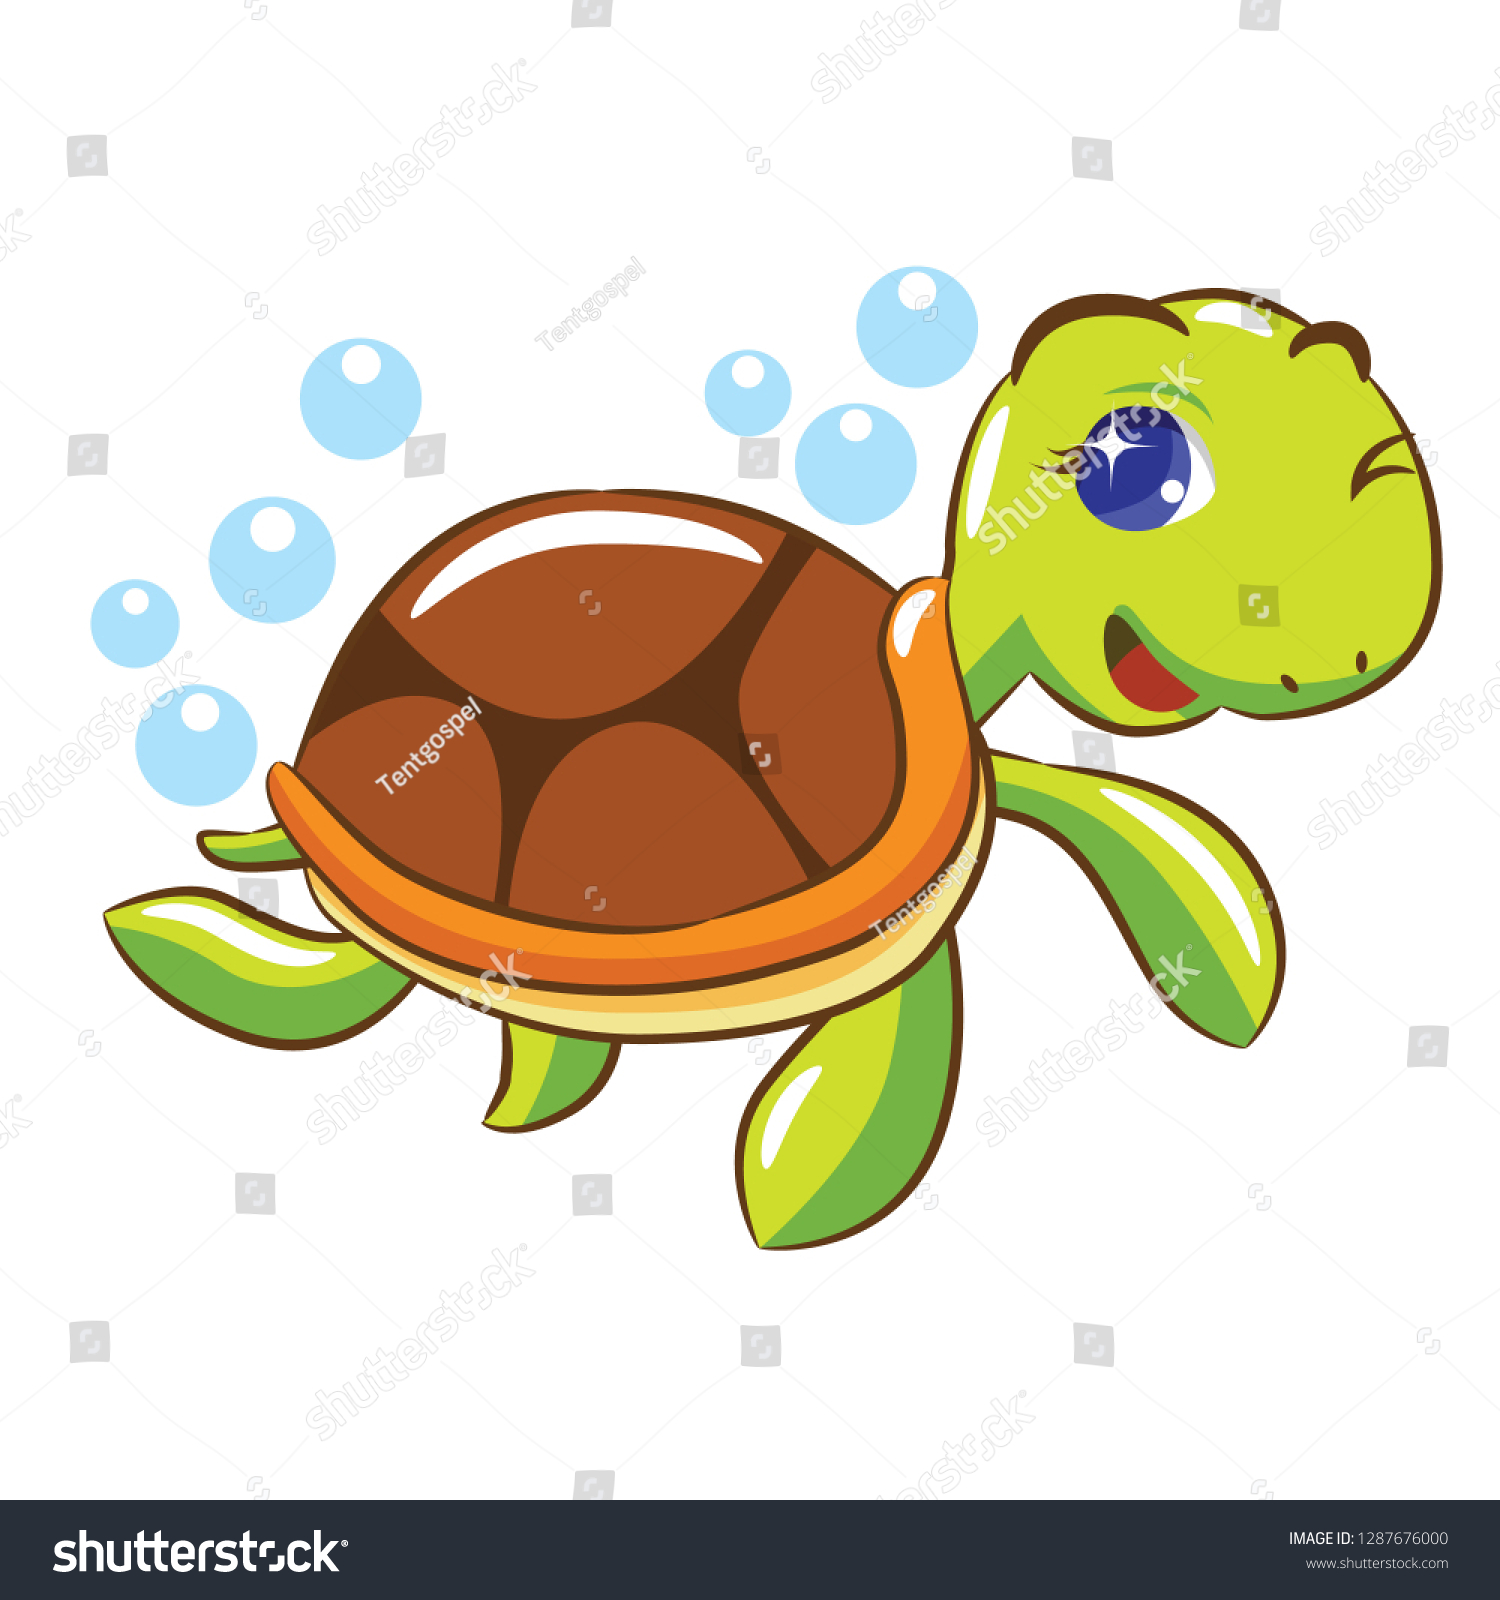 Turtle Clipart Design Stock Vector (Royalty Free) 1287676000 | Shutterstock